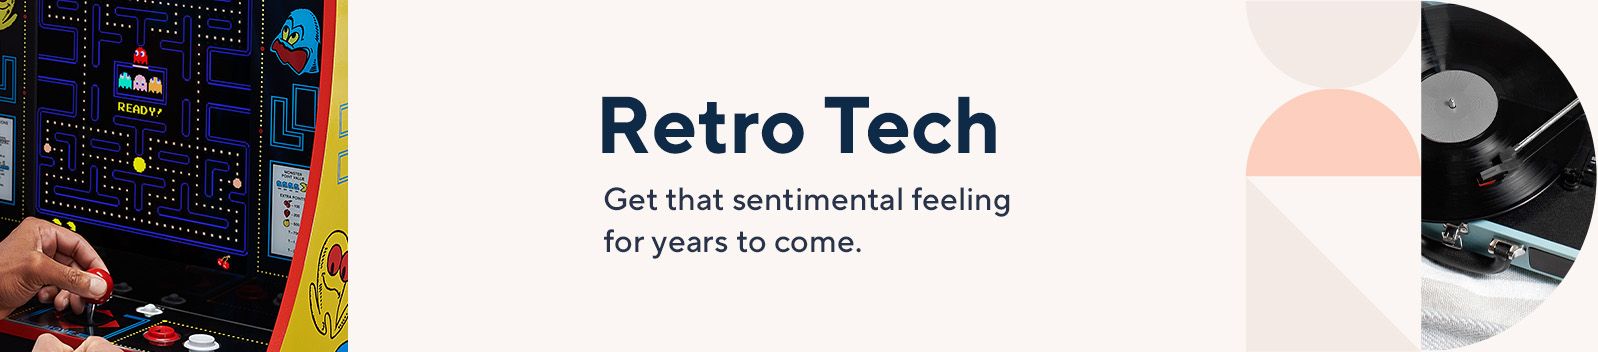 Retro-Style Tech Gifts. Get that sentimental feeling for years to come.